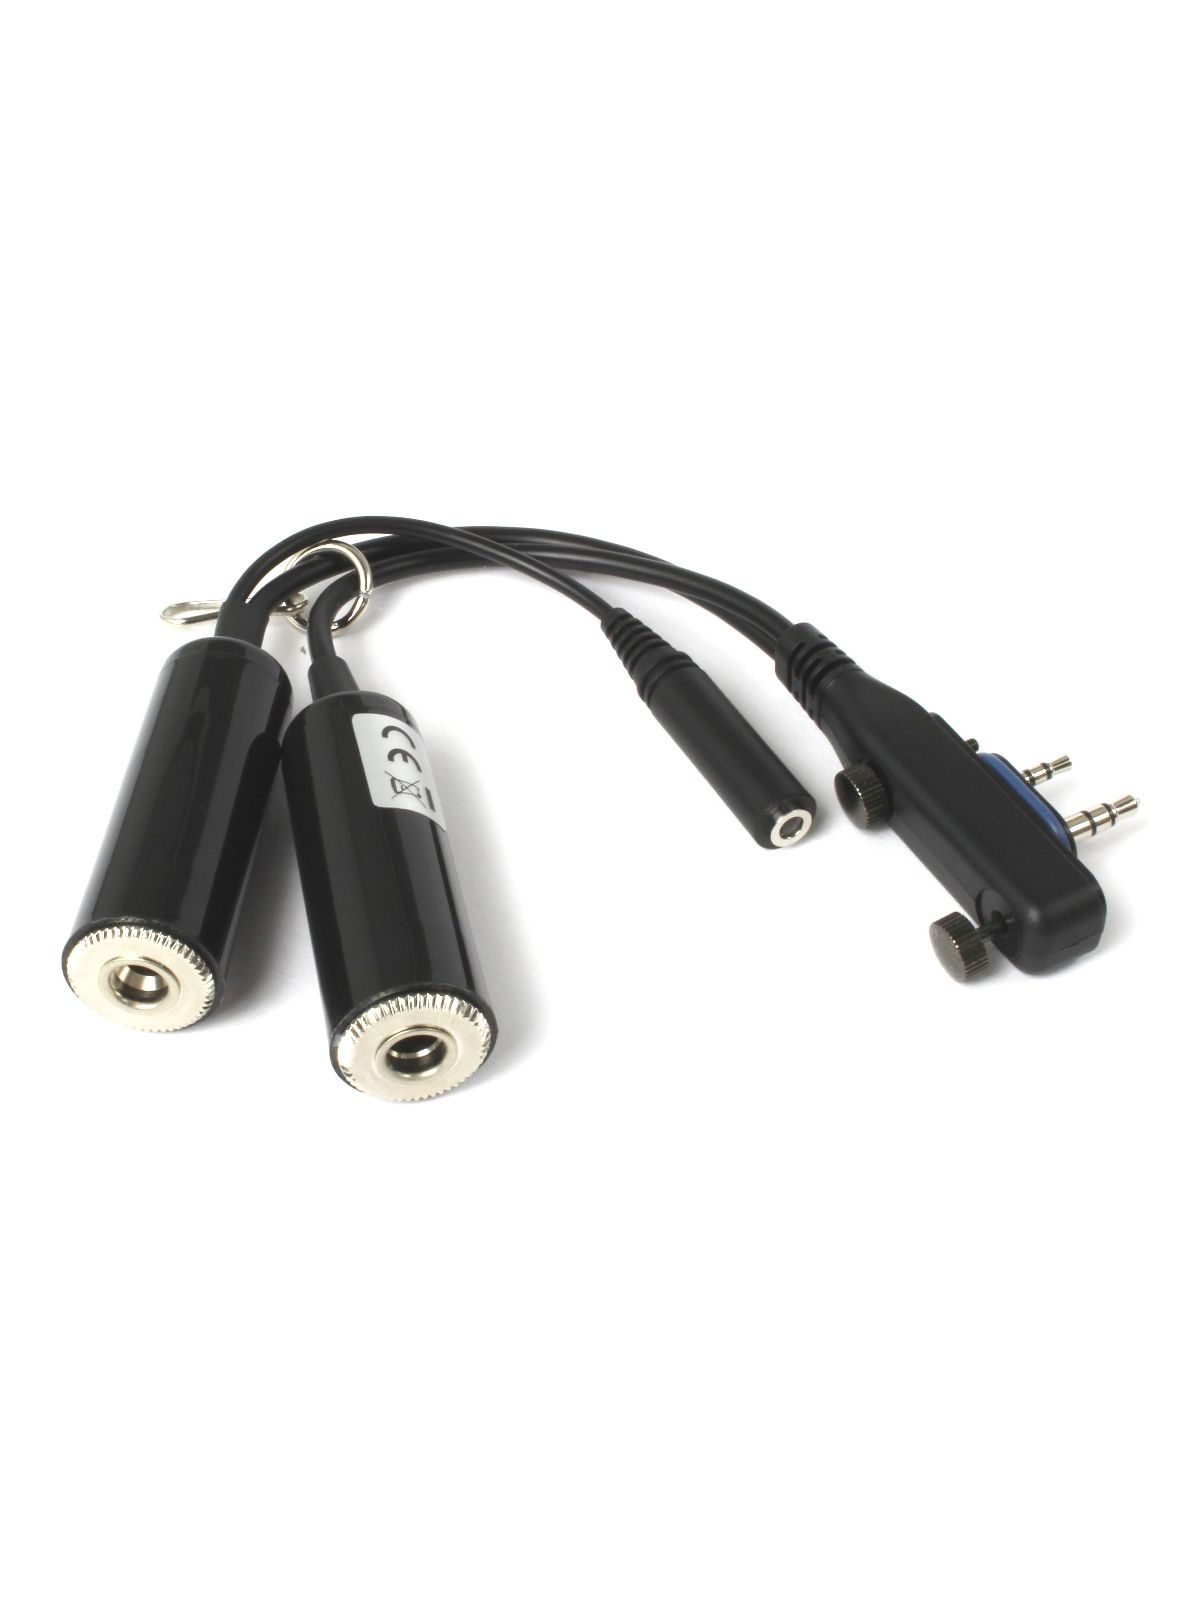 ICOM Headset Adaptor Cable for Transceiver Connection - IC-A16E (OPC-2401), LWP Connector